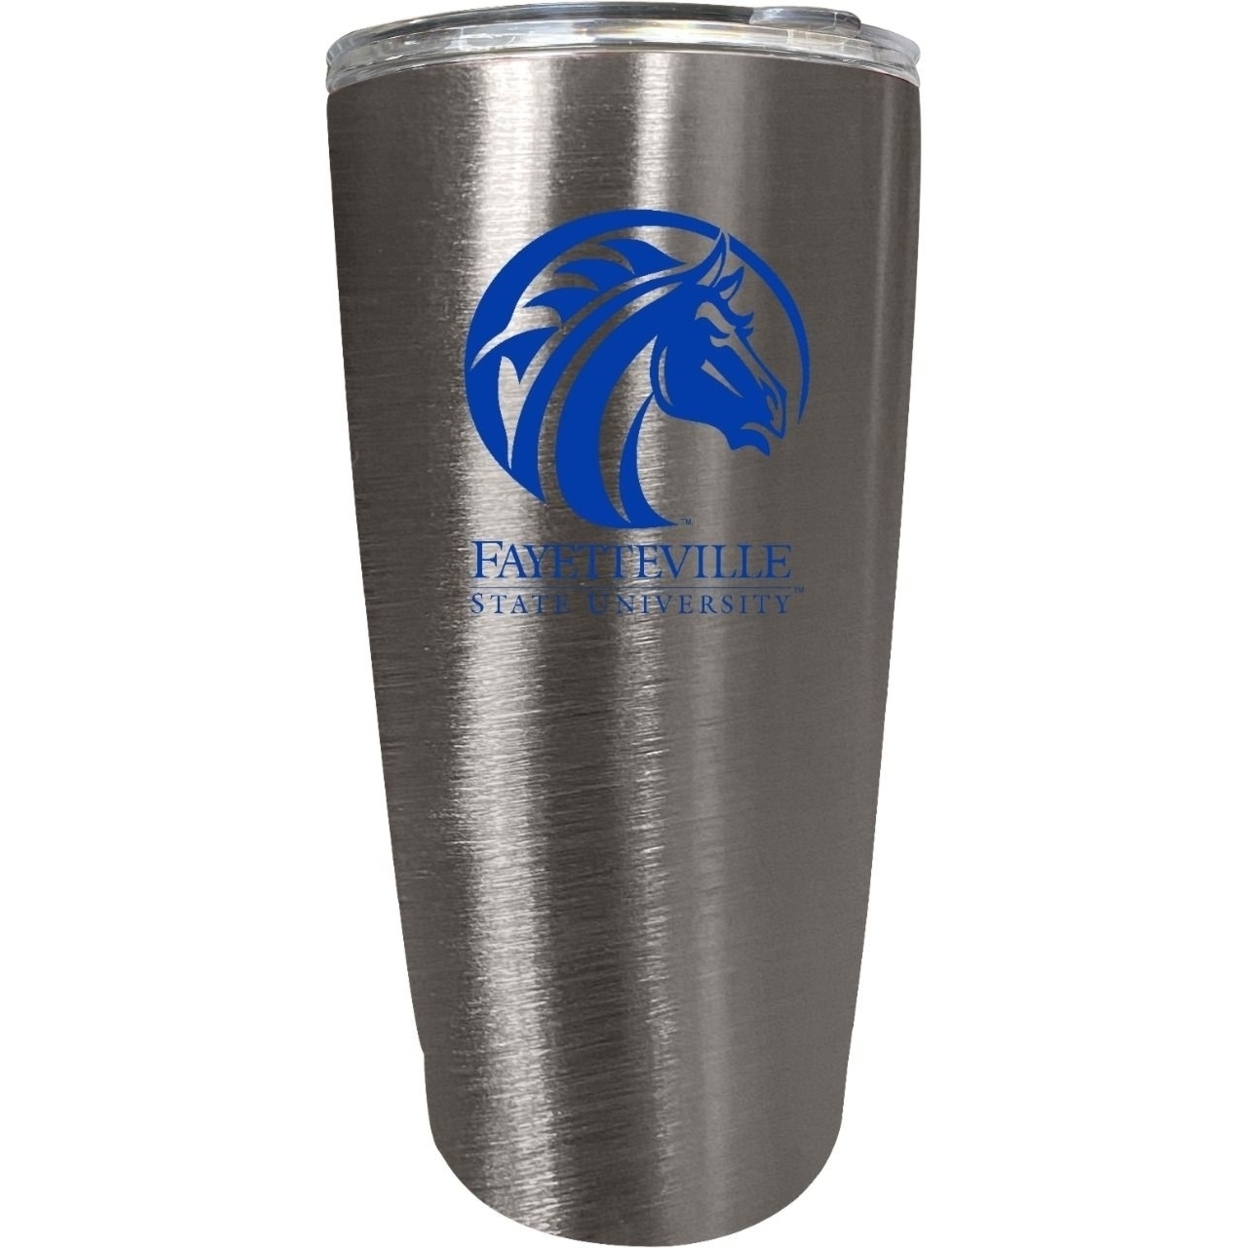 Fayetteville State University 16 Oz Insulated Stainless Steel Tumbler Colorless